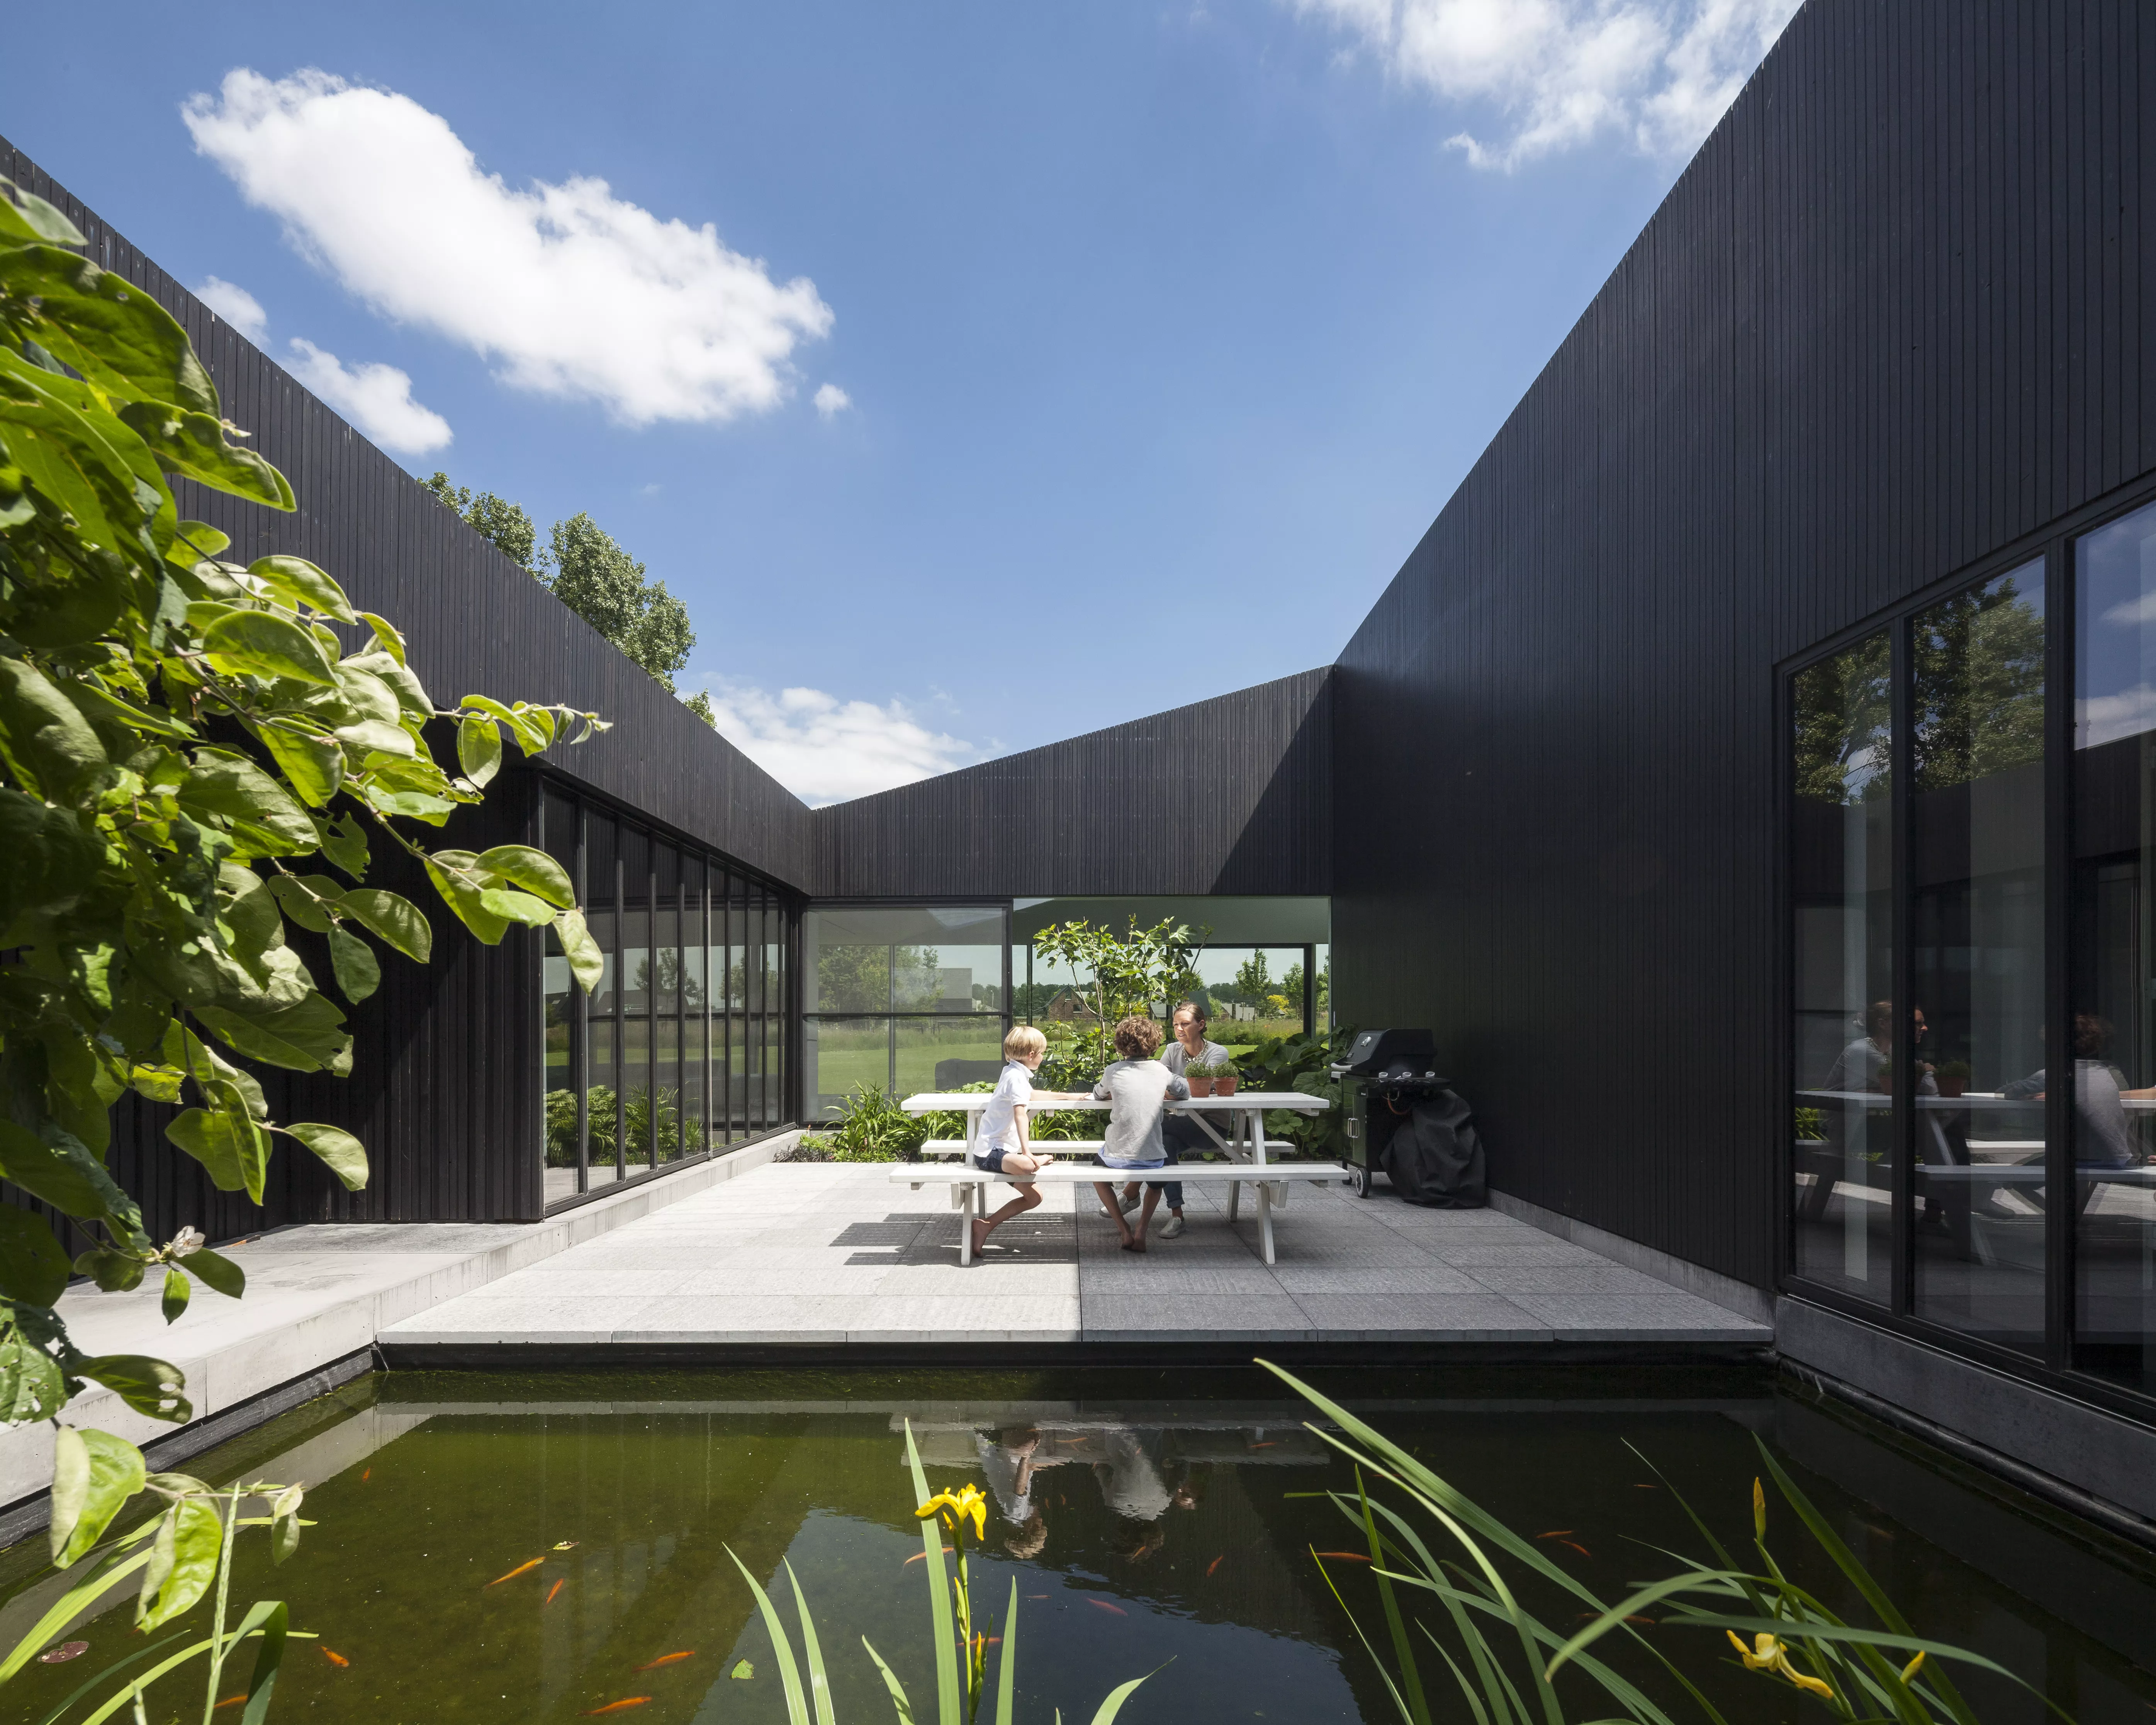  HIMACS chosen for the “TV House” in Belgium